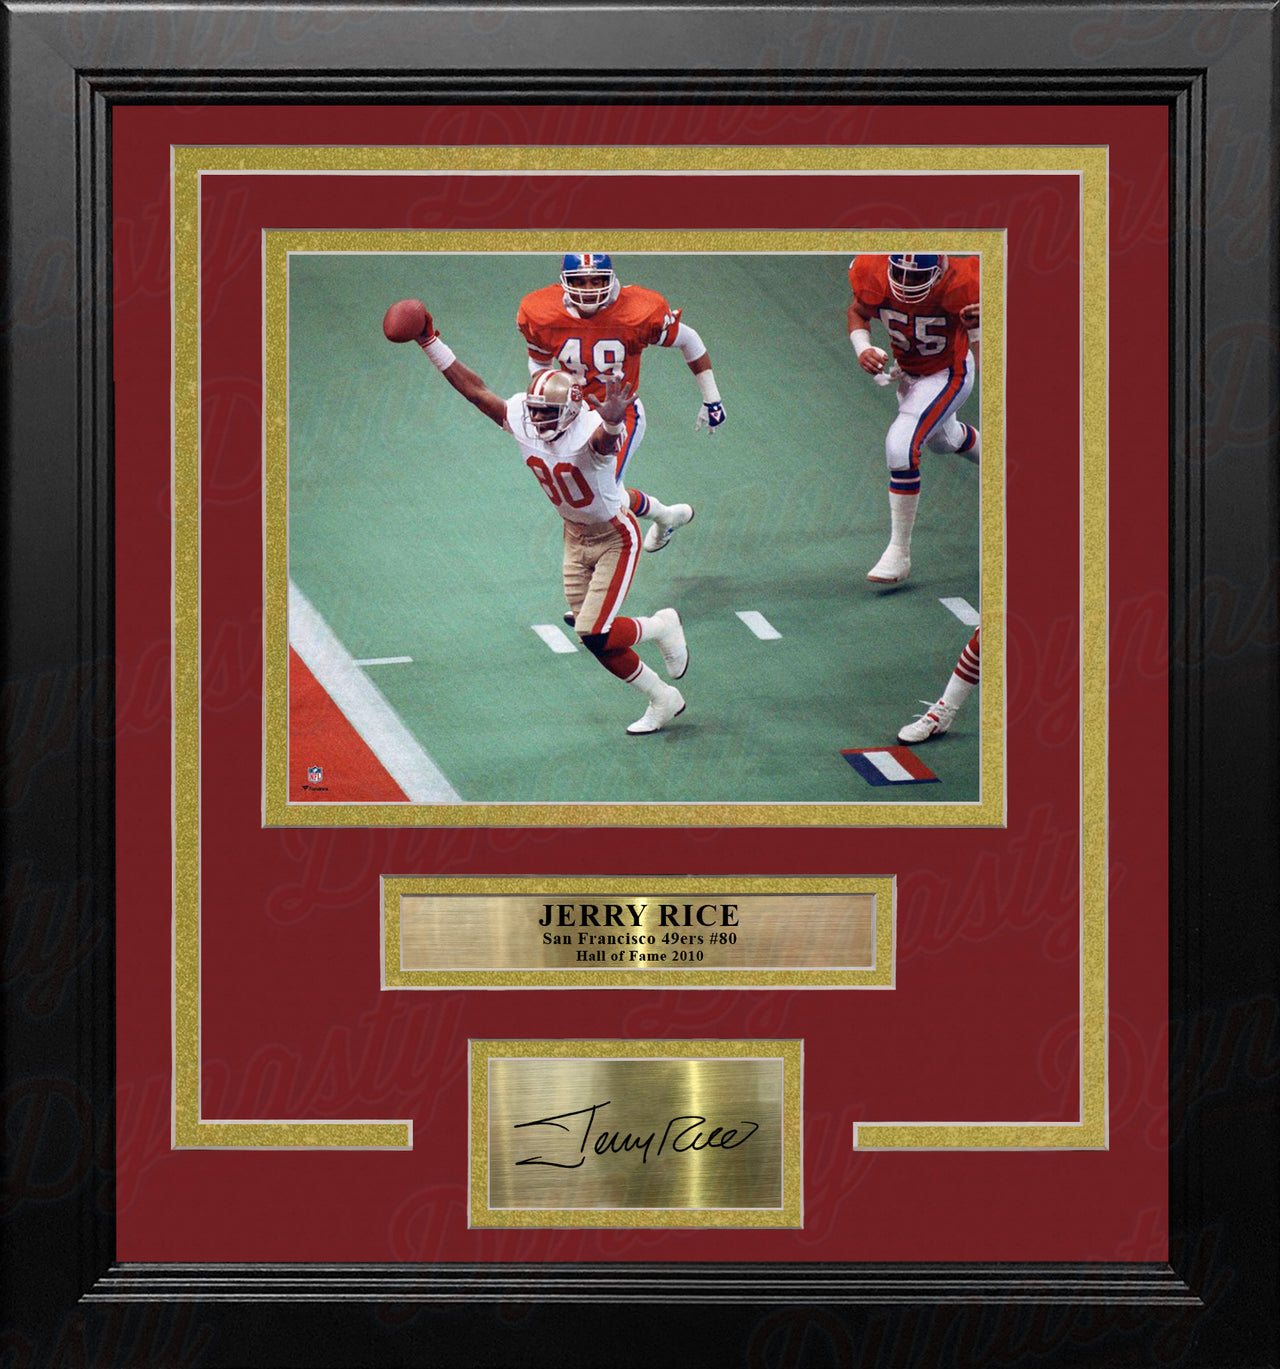 Jerry Rice Super Bowl XXIV Touchdown San Francisco 49ers 8x10 Framed Photo with Engraved Autograph